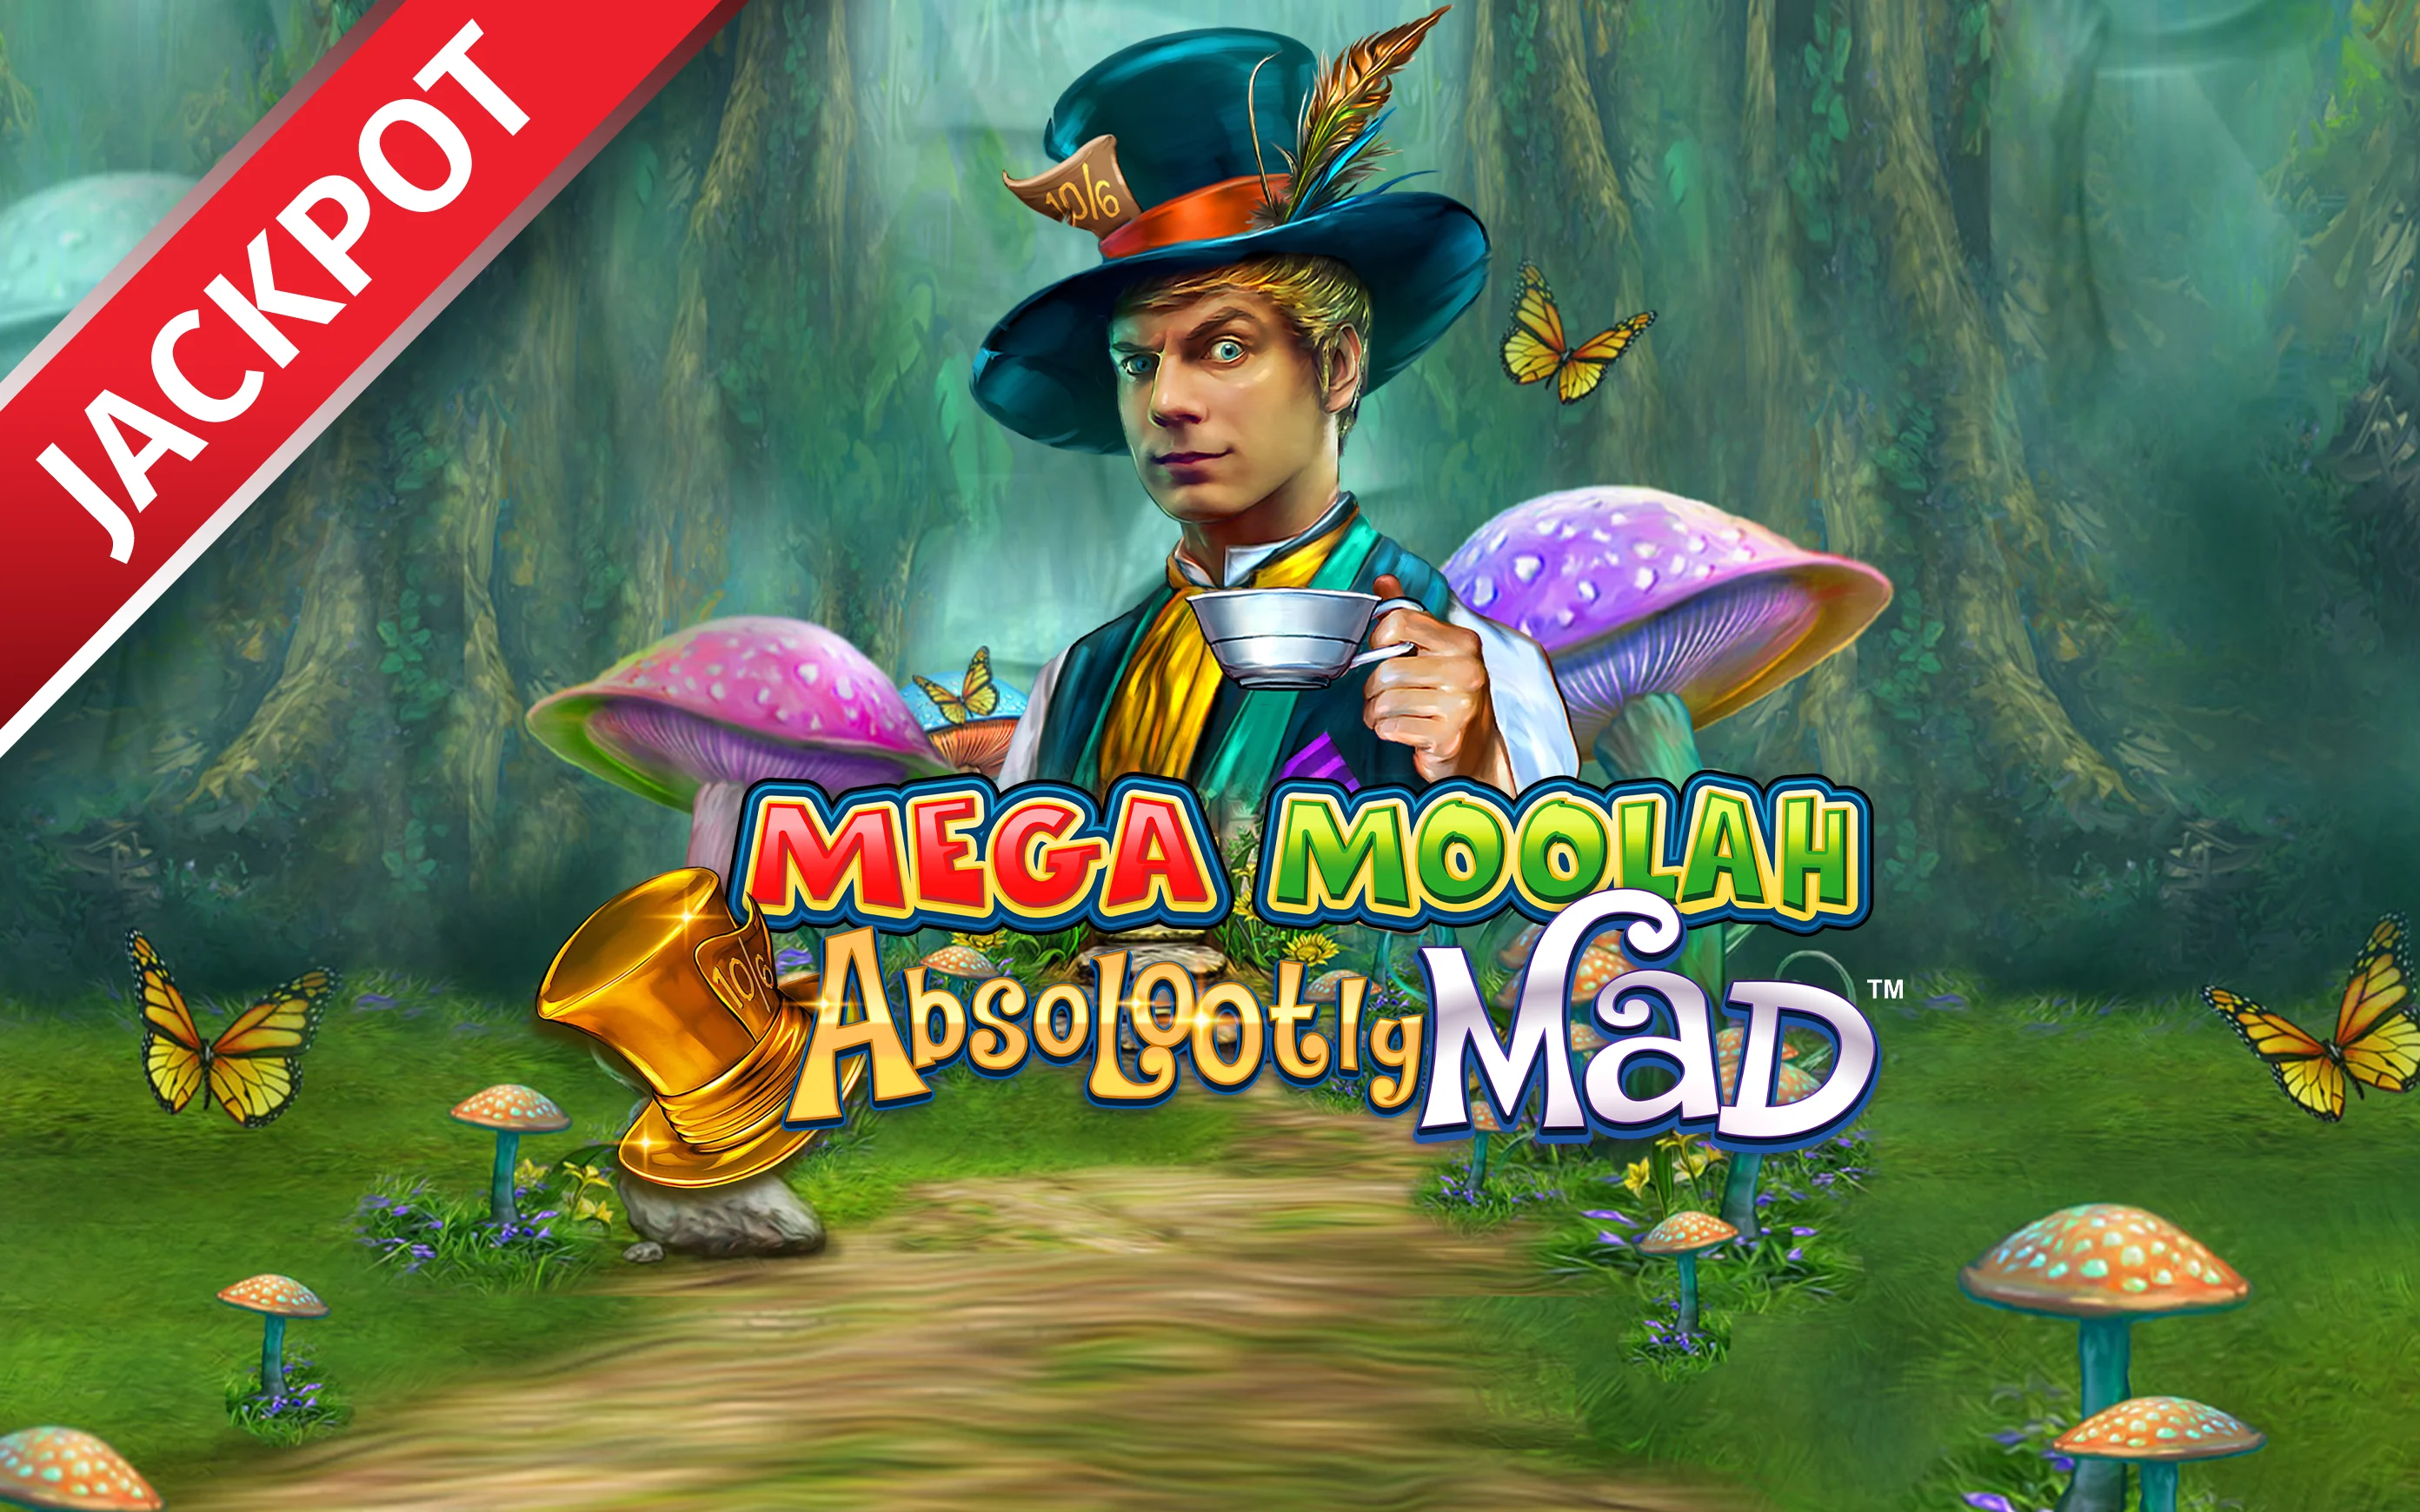 Play Absolootly Mad Mega Moolah™ on Starcasino.be online casino